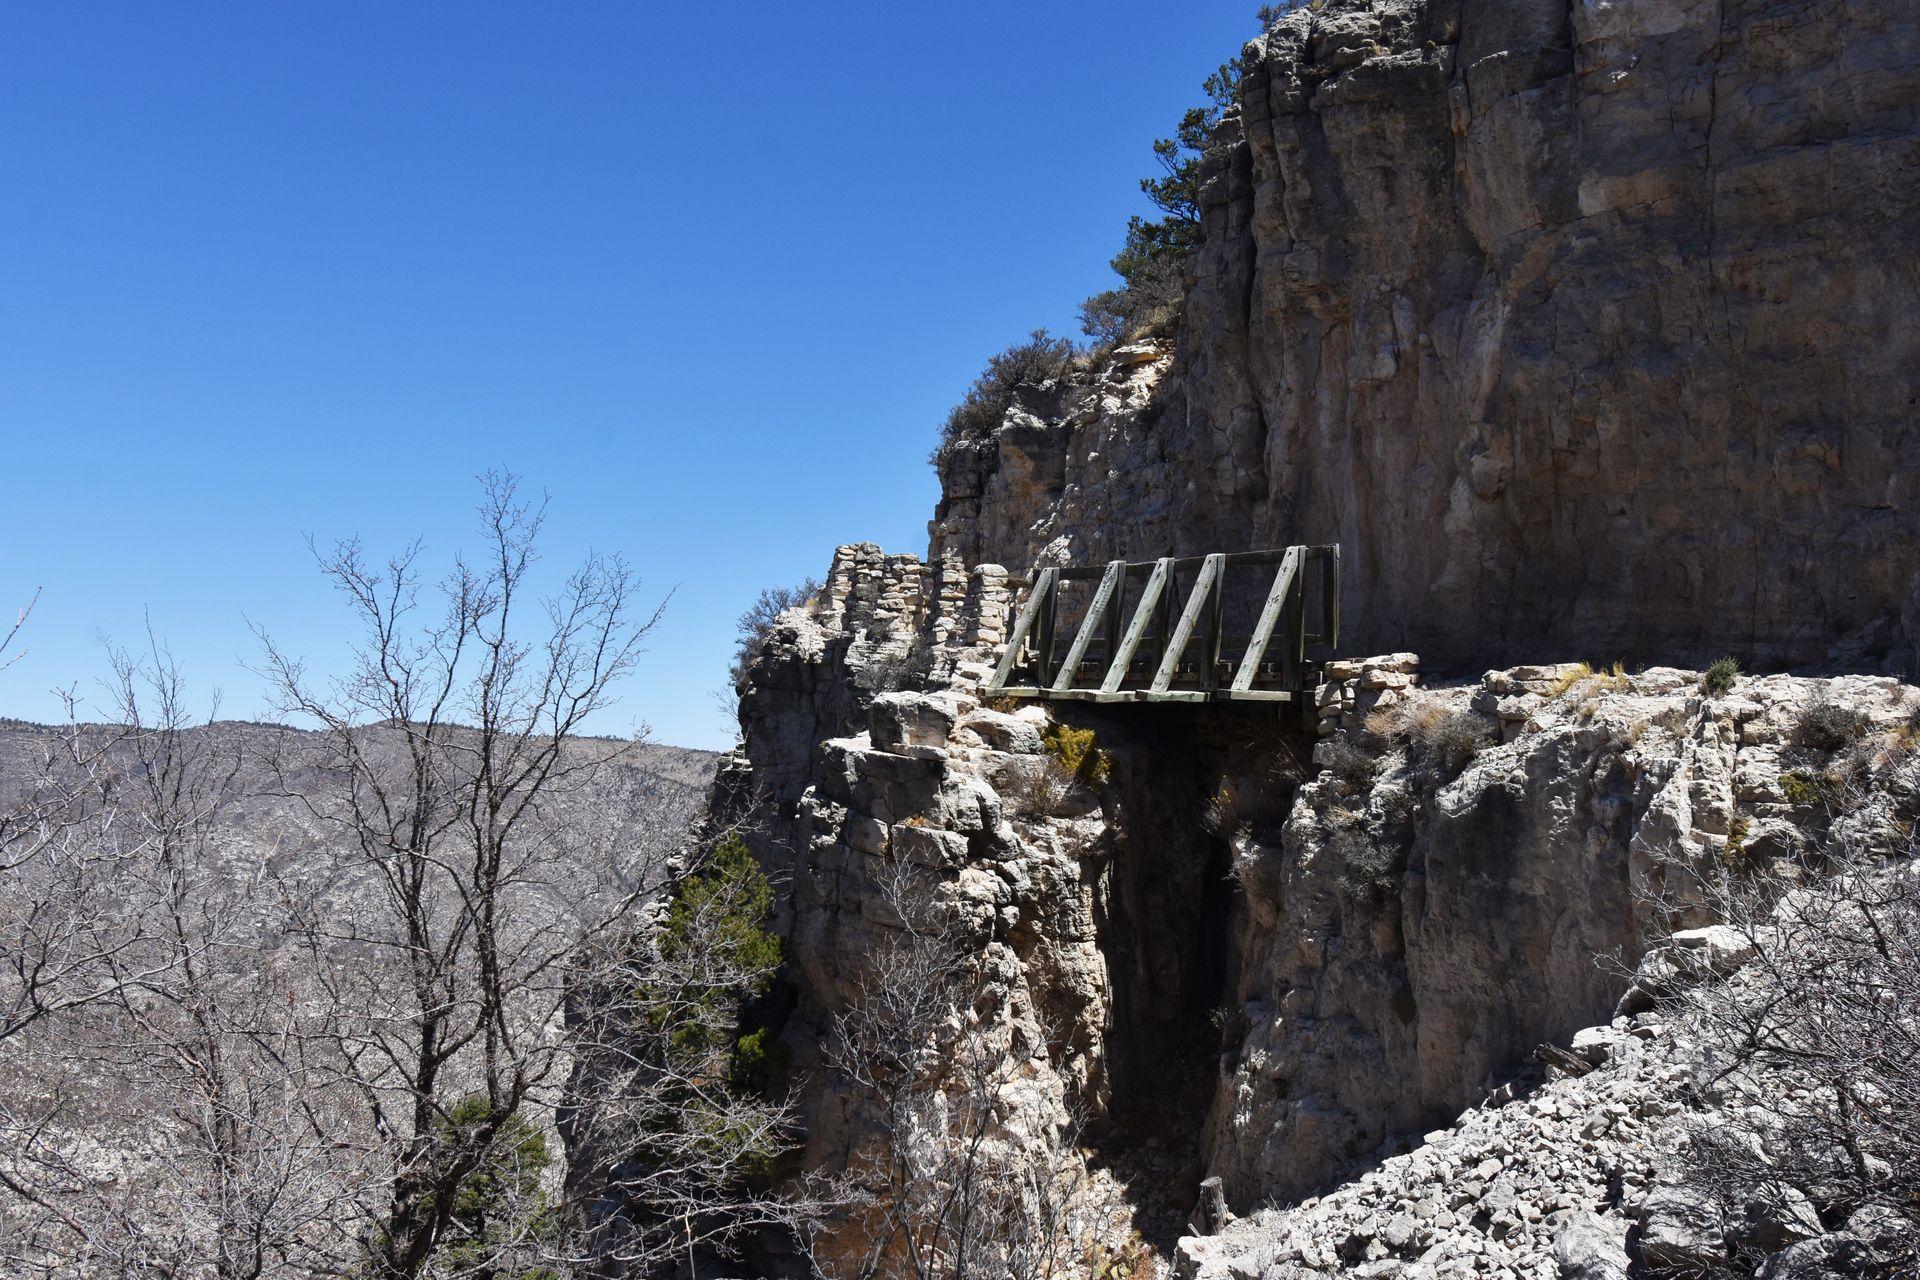 A bridge on the side of the mountain on the Guadalupe Peak trail.